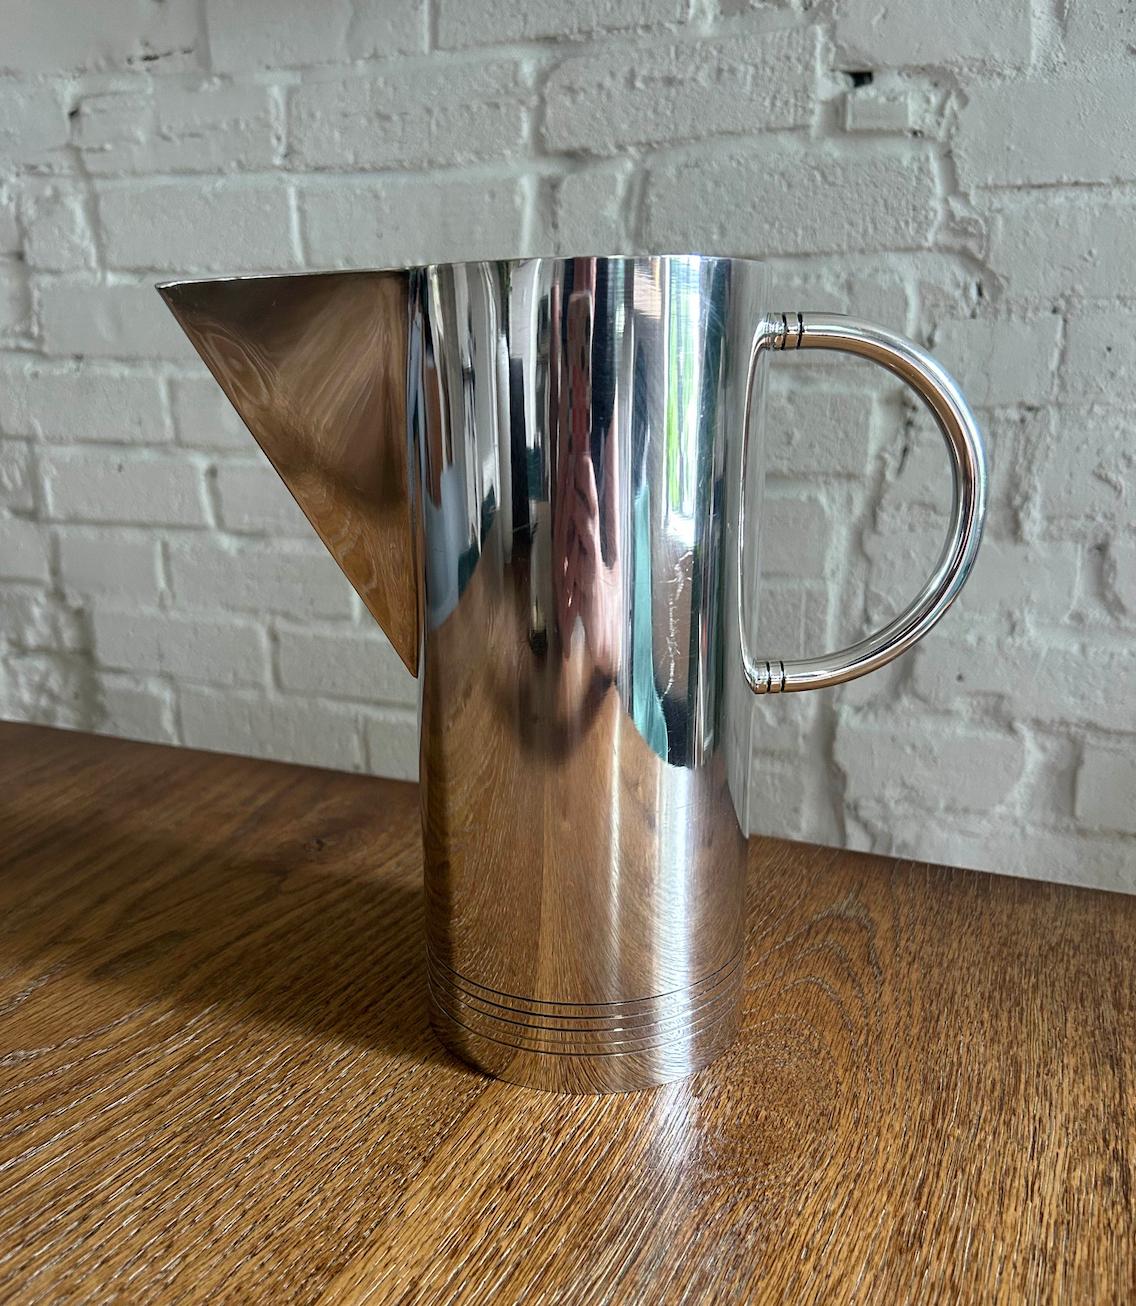 Circa 1980s silverplate pitcher by Richard Meier for Swid Powell of New York City. Made in Argentina and in great vintage condition. Marked 